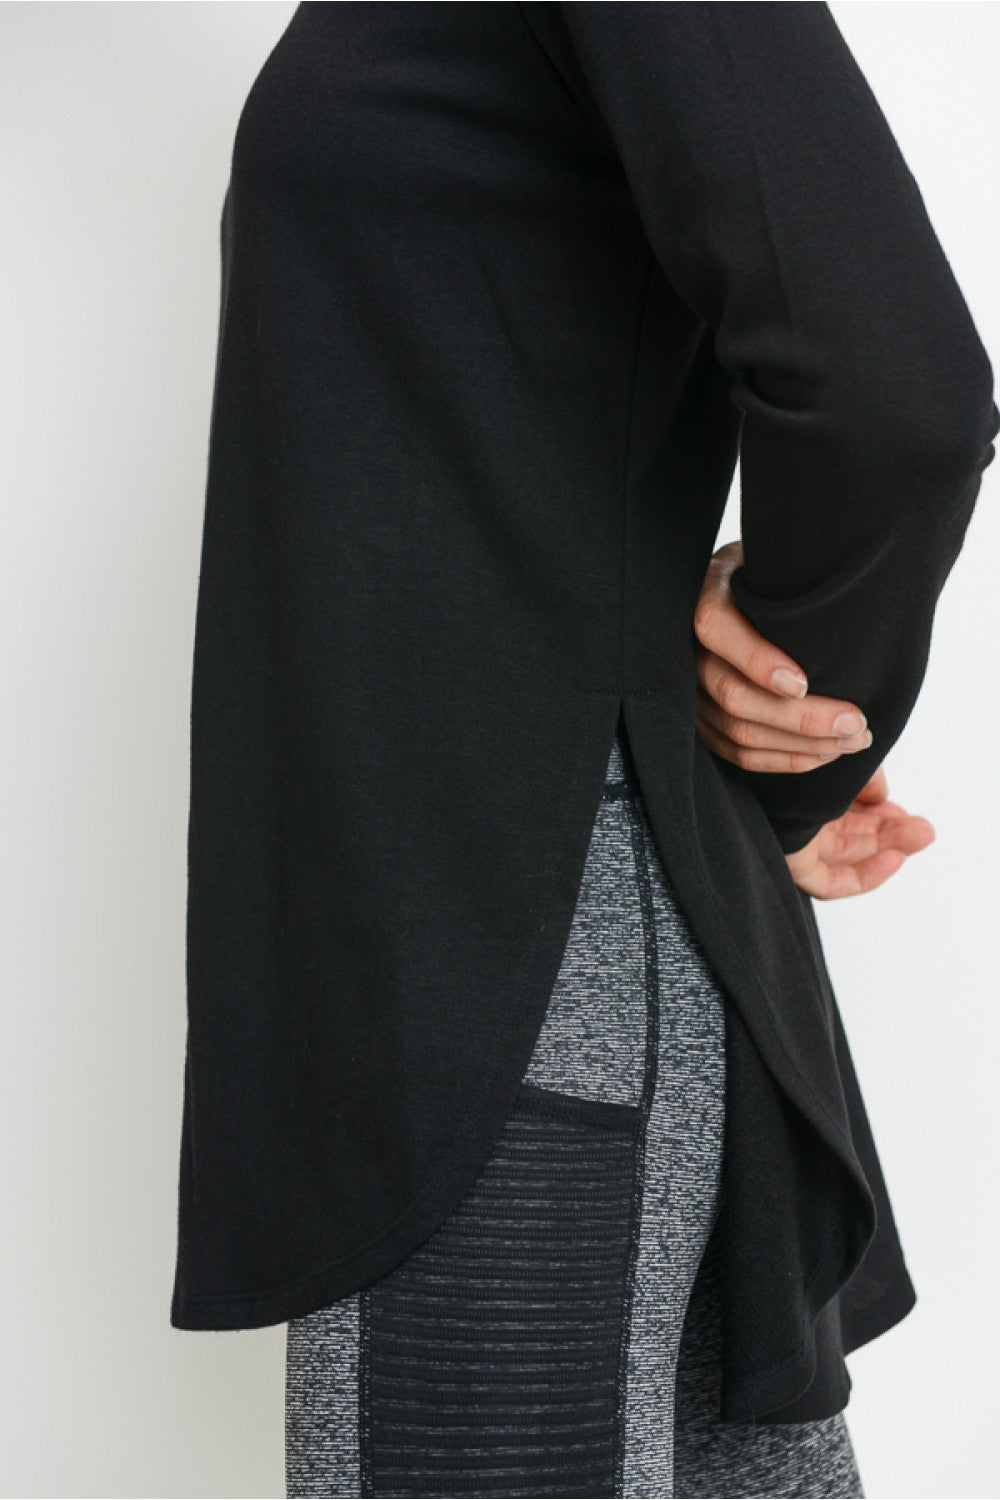 -Abby Side Slit Tunic-  You want to add this to your wardrobe basics. This longer length tunic is versatile to dress up or down. The side slits add just the right amount of detail and style.  70% Polyester, 30% Viscose Machine wash cold, hang dry or tumble dry Fit: Runs to to size in Womens. Loose fit.